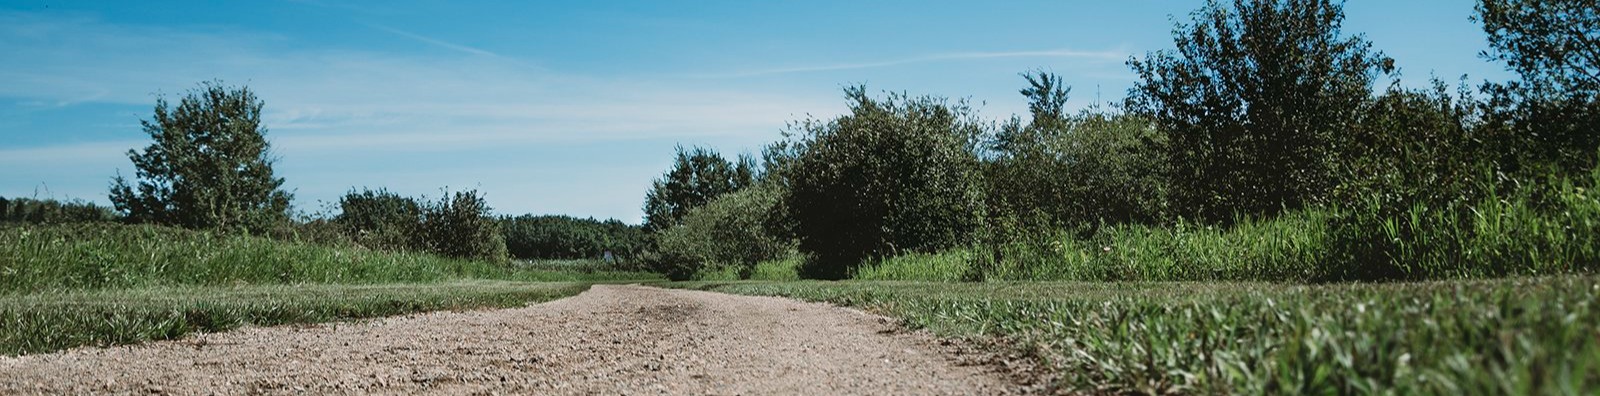 gravel road with trees and blue sky